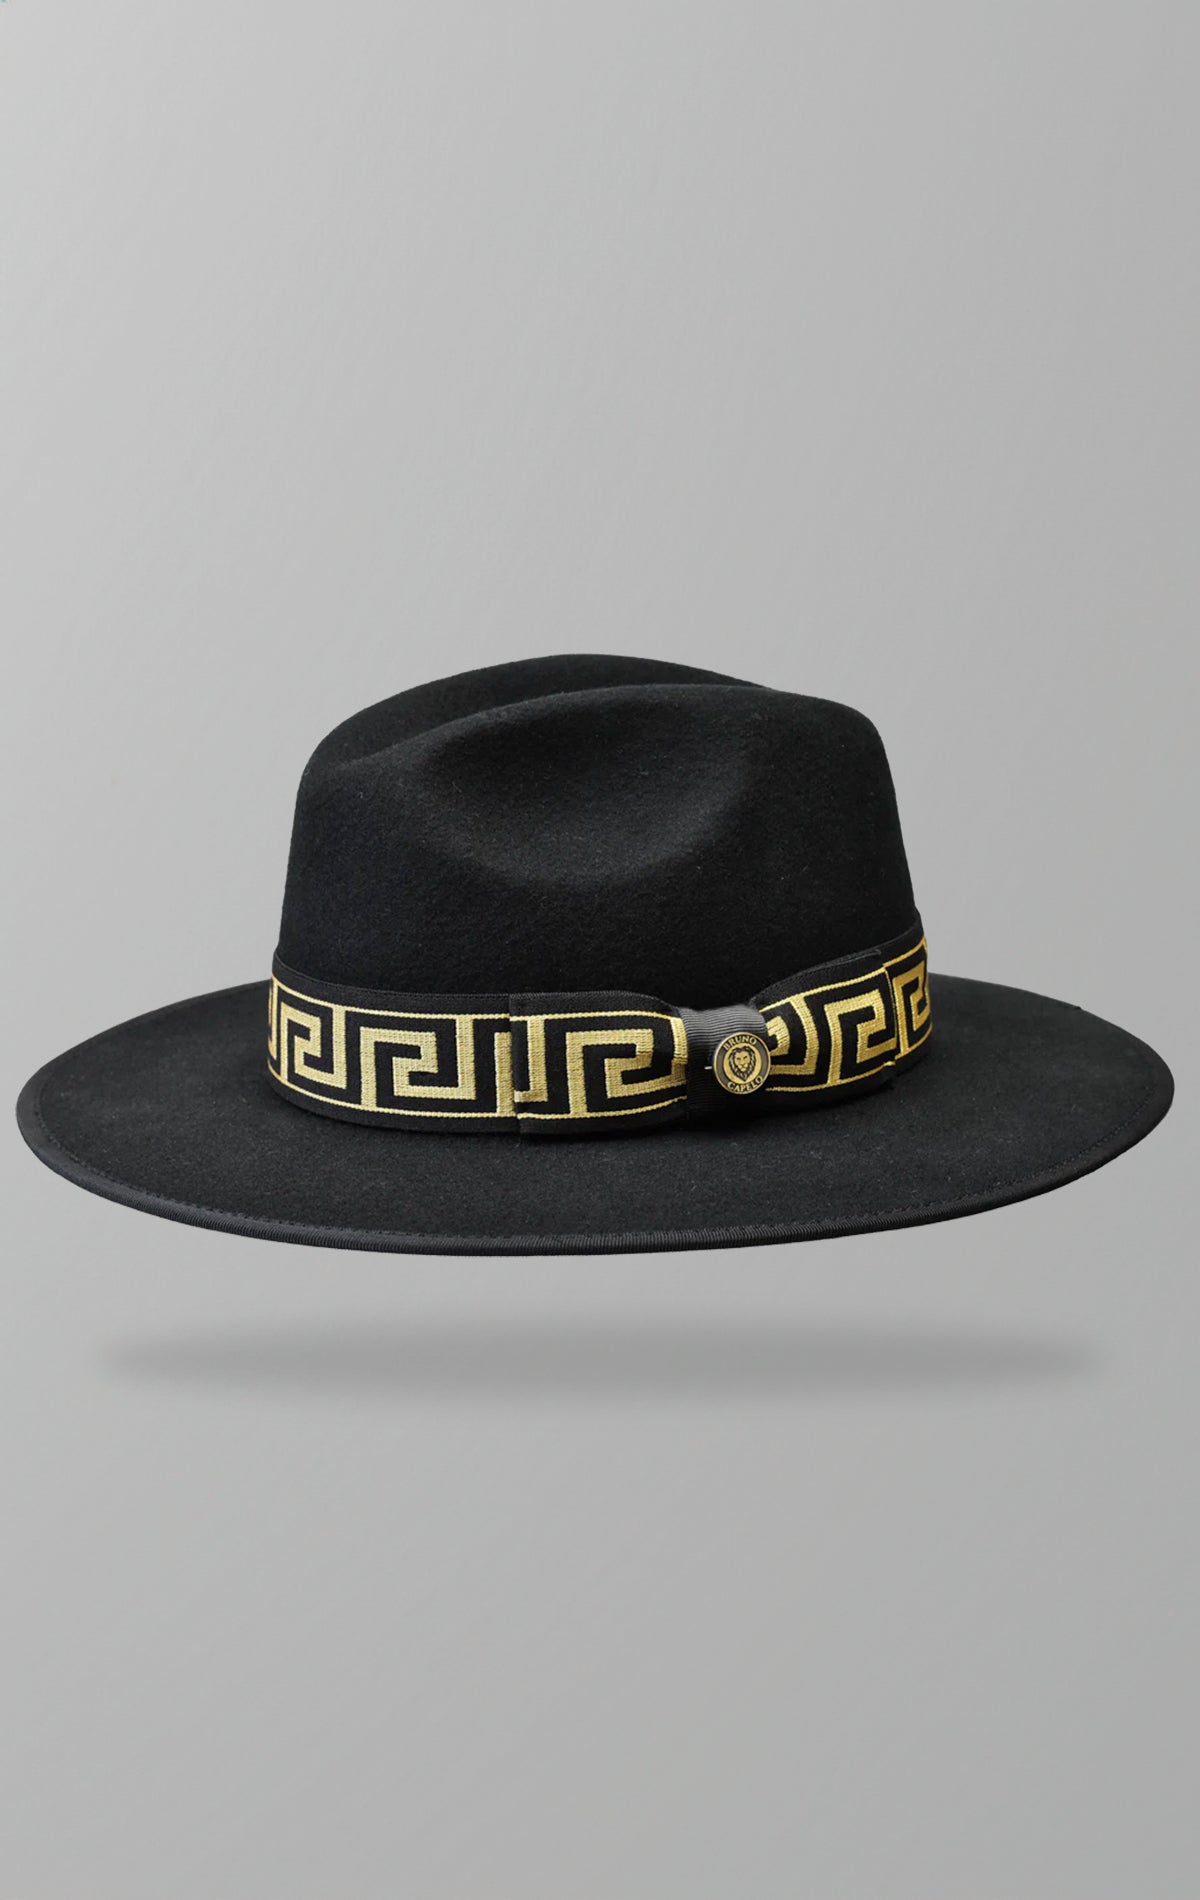 Fedora from the Wesley Collection with a 3-inch wide brim, grosgrain ribbon, and satin lining, crafted from 100% Australian Wool.